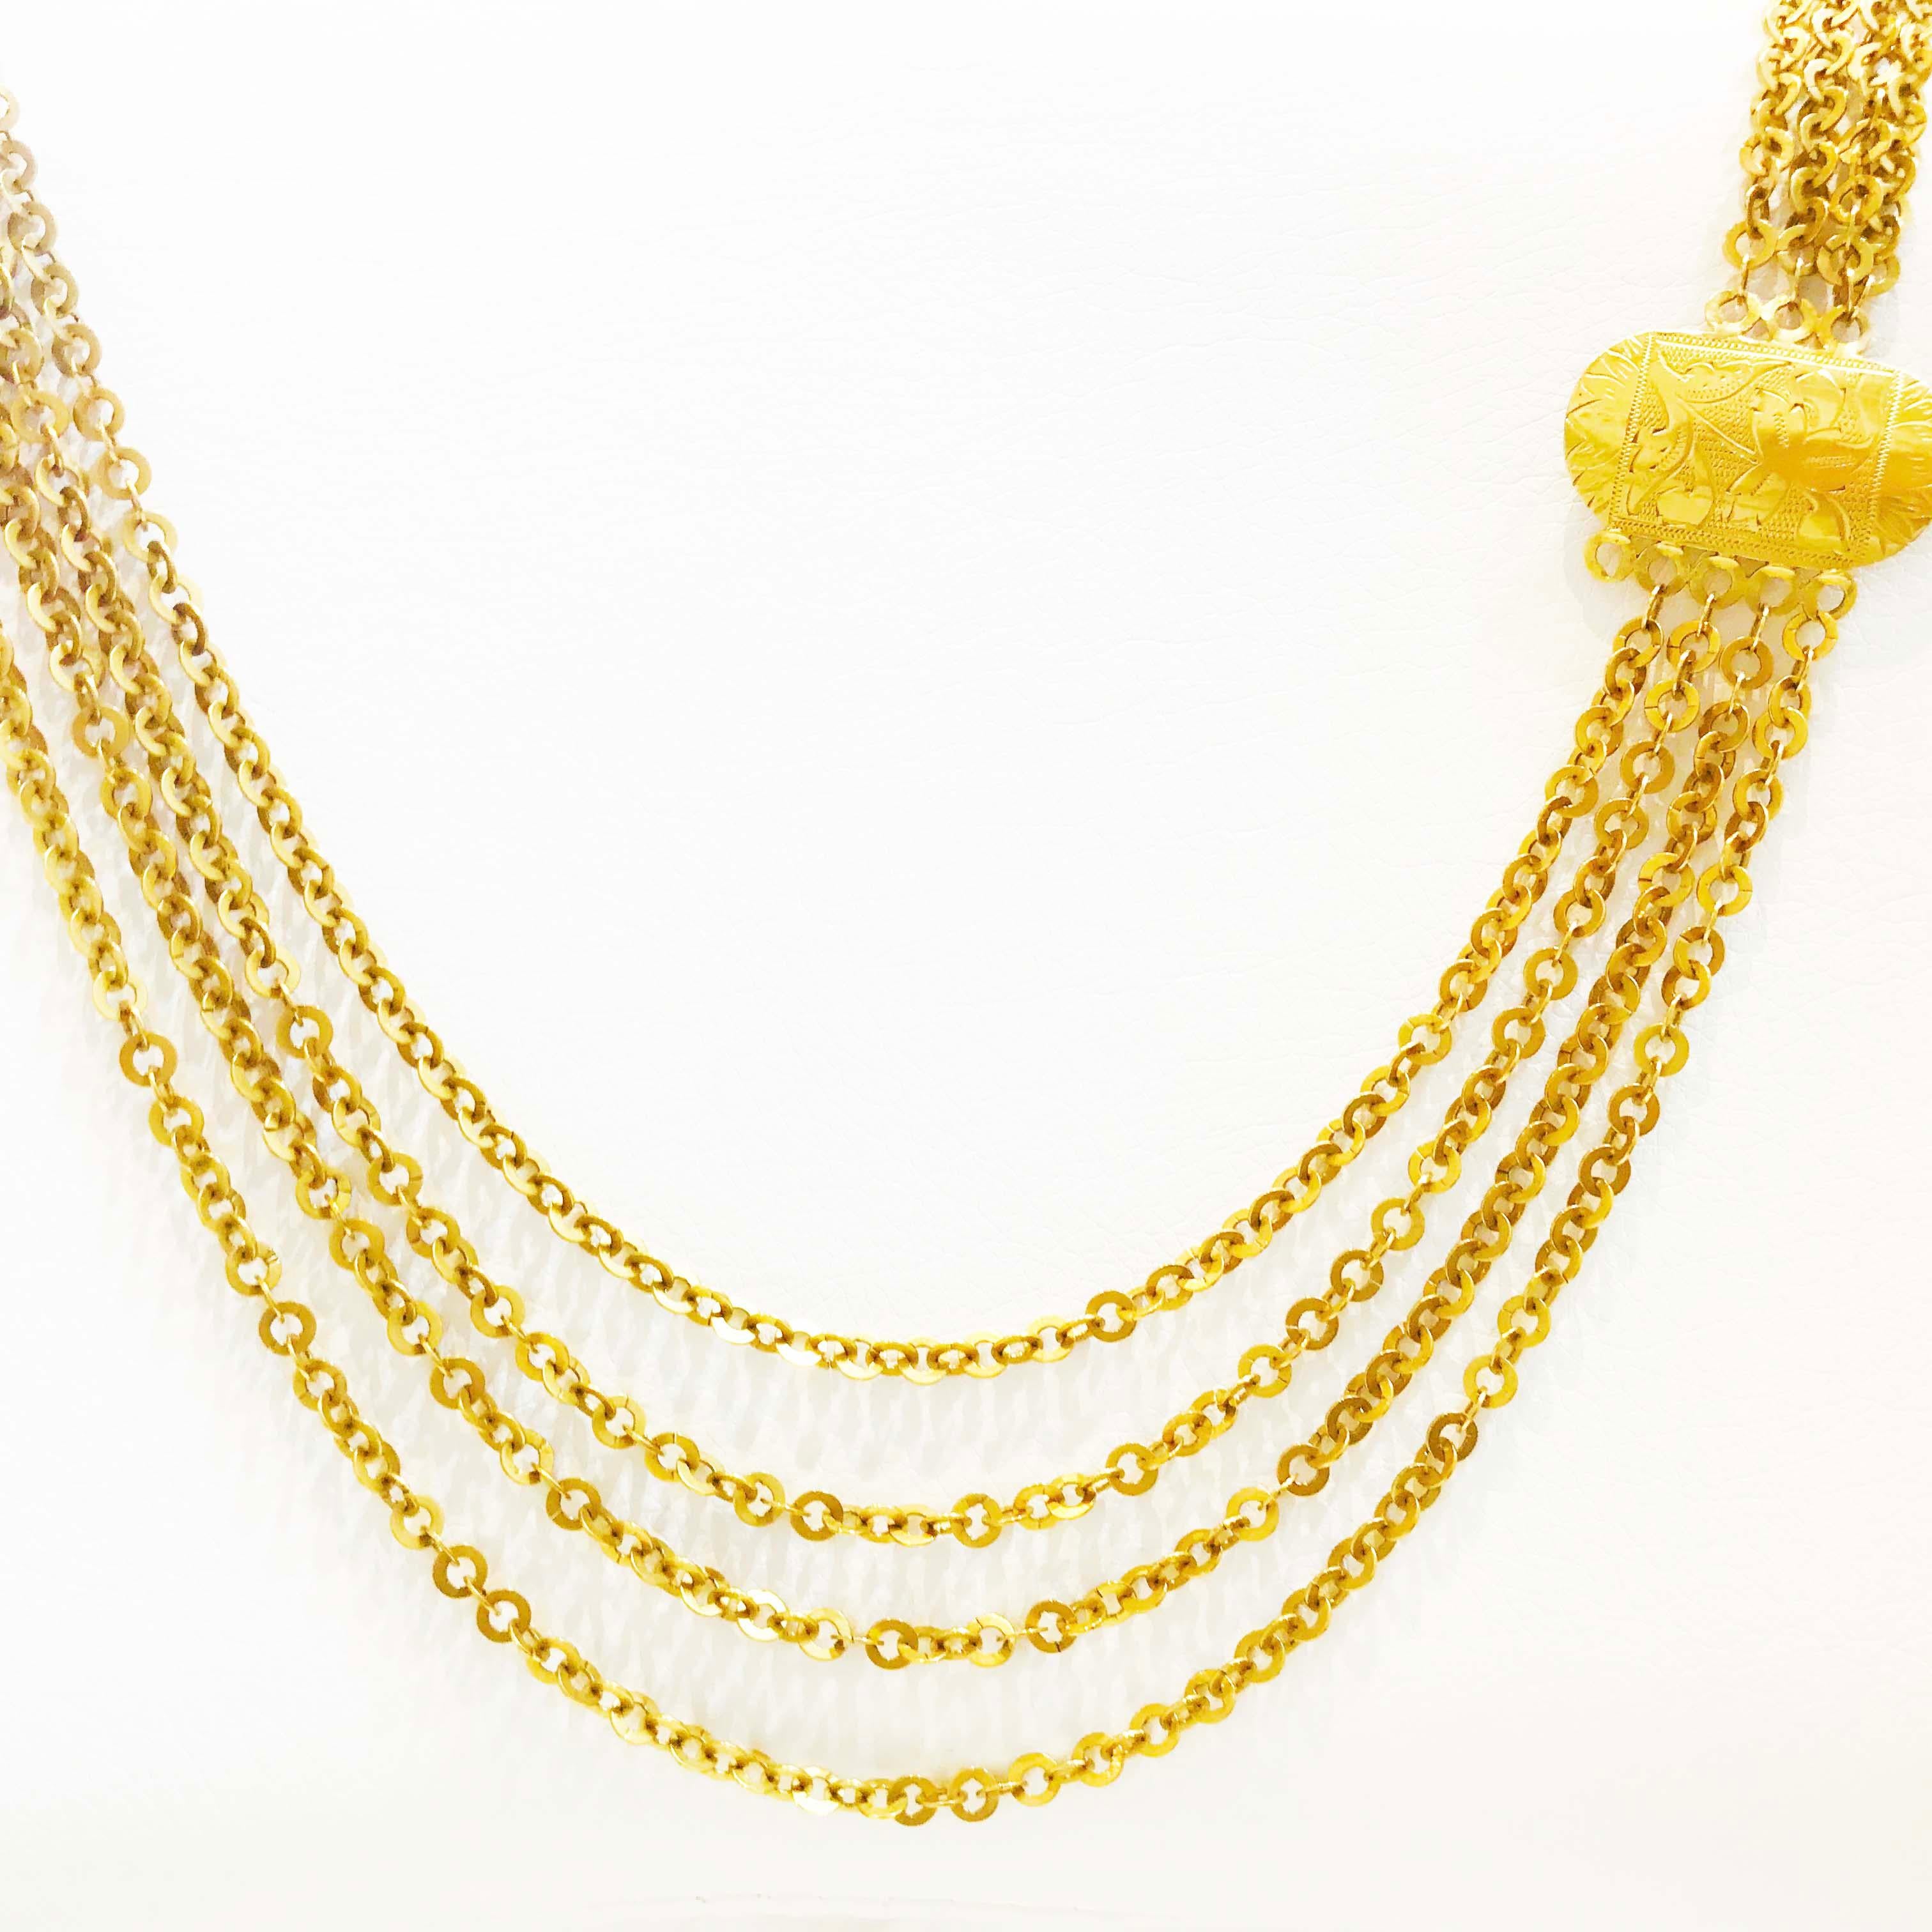 This gold necklace has four large link chains that Is thirty(30) inches long with an oval disk.  The oval disk is hand engraved and the entire necklace is quite striking!  The necklace is CIRCA 1920.  